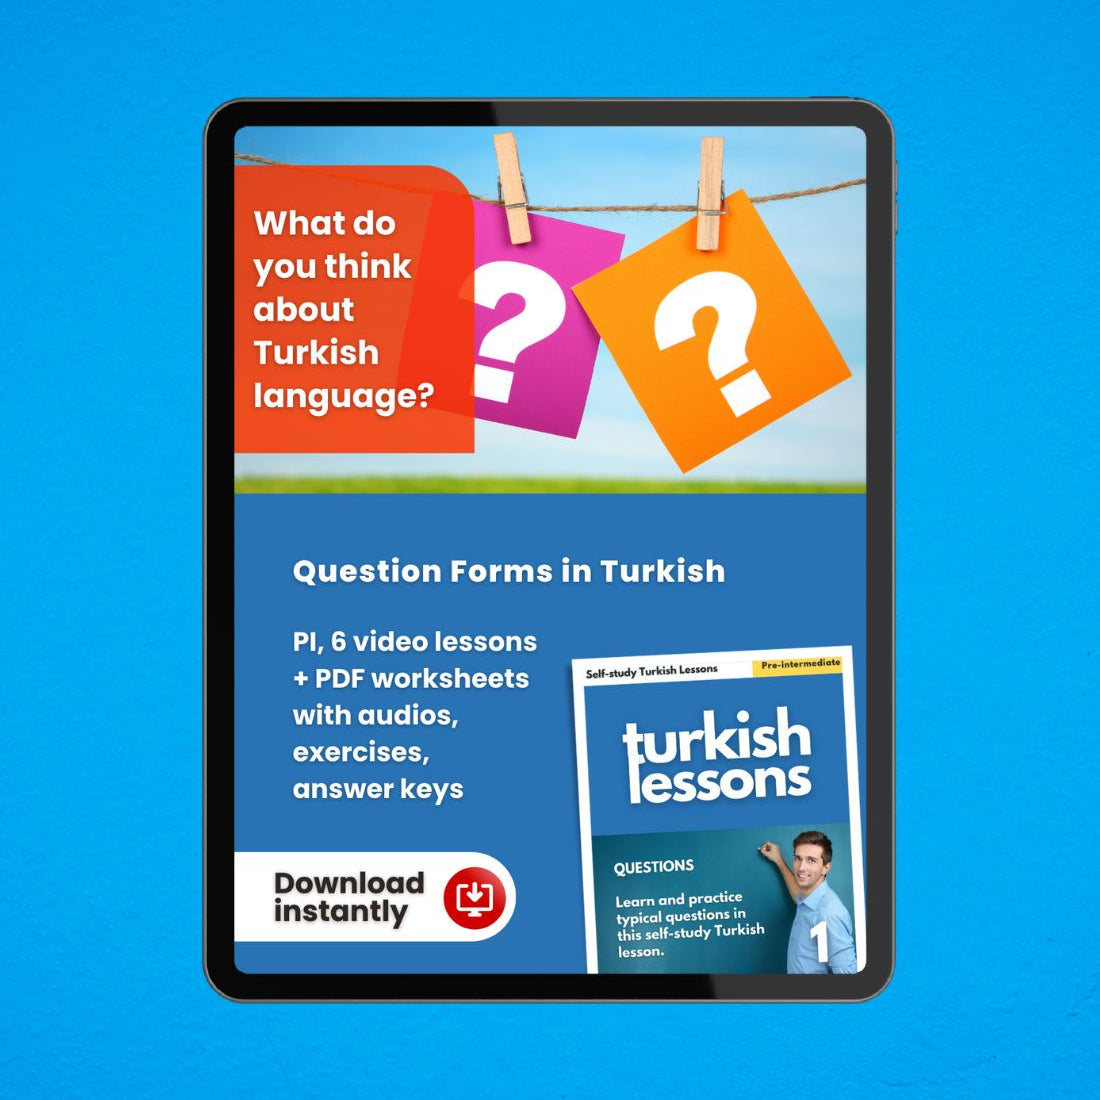 turkish lessons - questions in turkish language